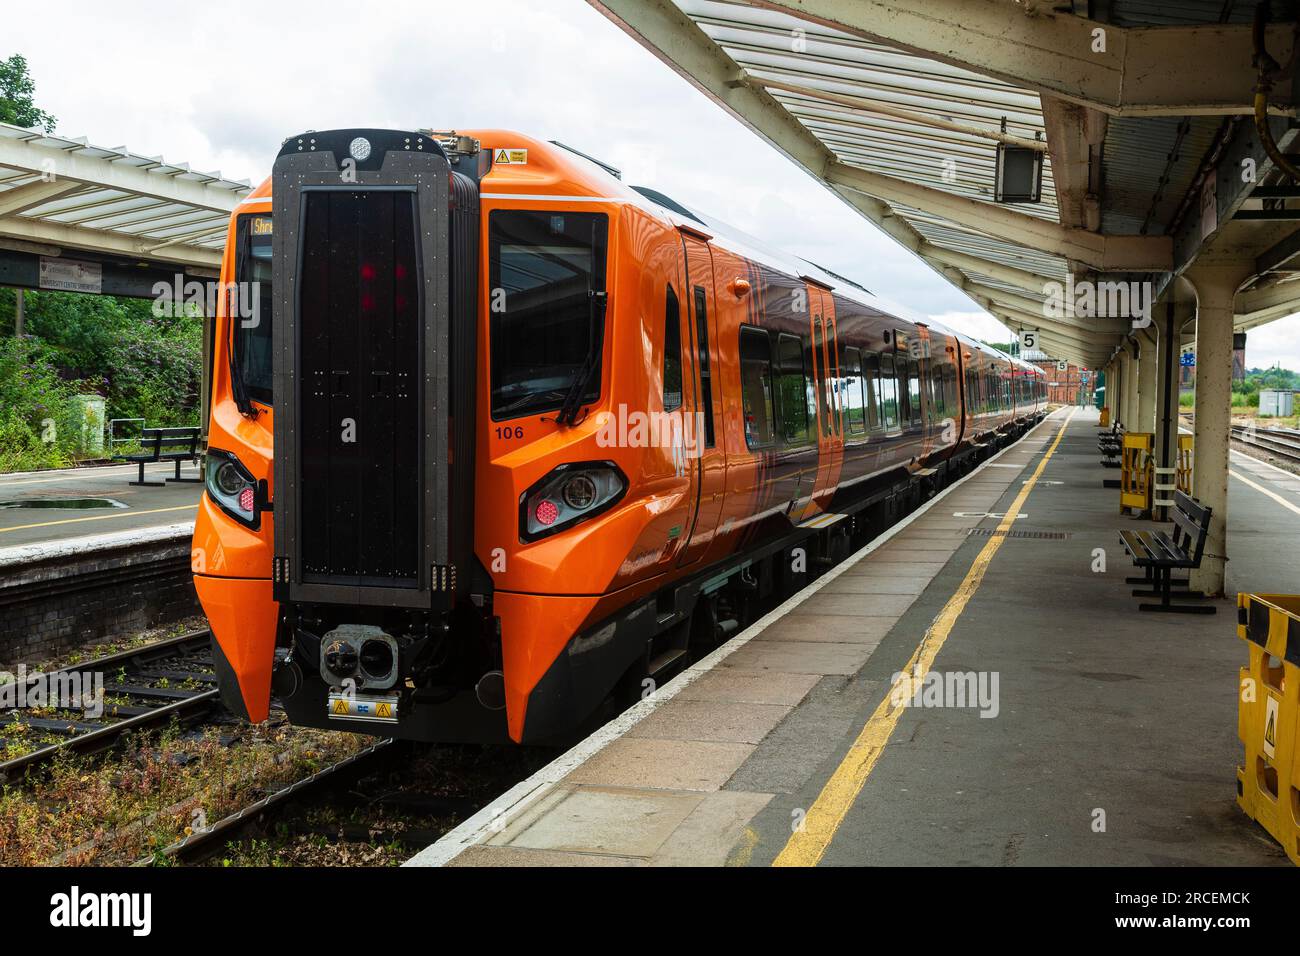 Class 196 train operated by West Midlands Railway (WMT) at Shrewsbury Station. Stock Photo